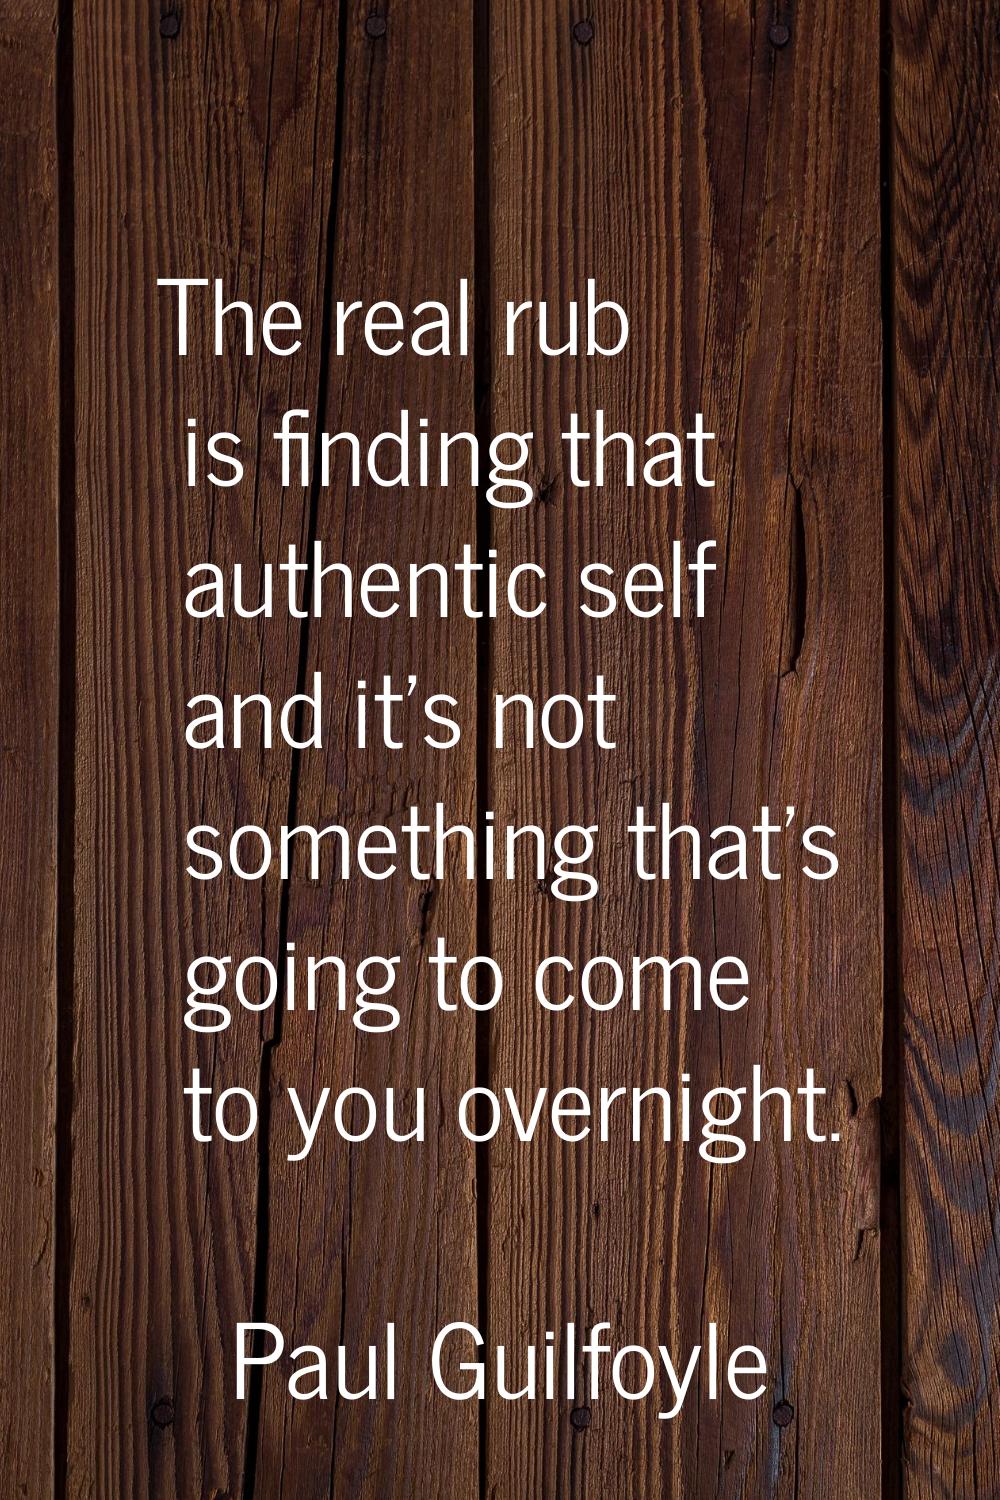 The real rub is finding that authentic self and it's not something that's going to come to you over